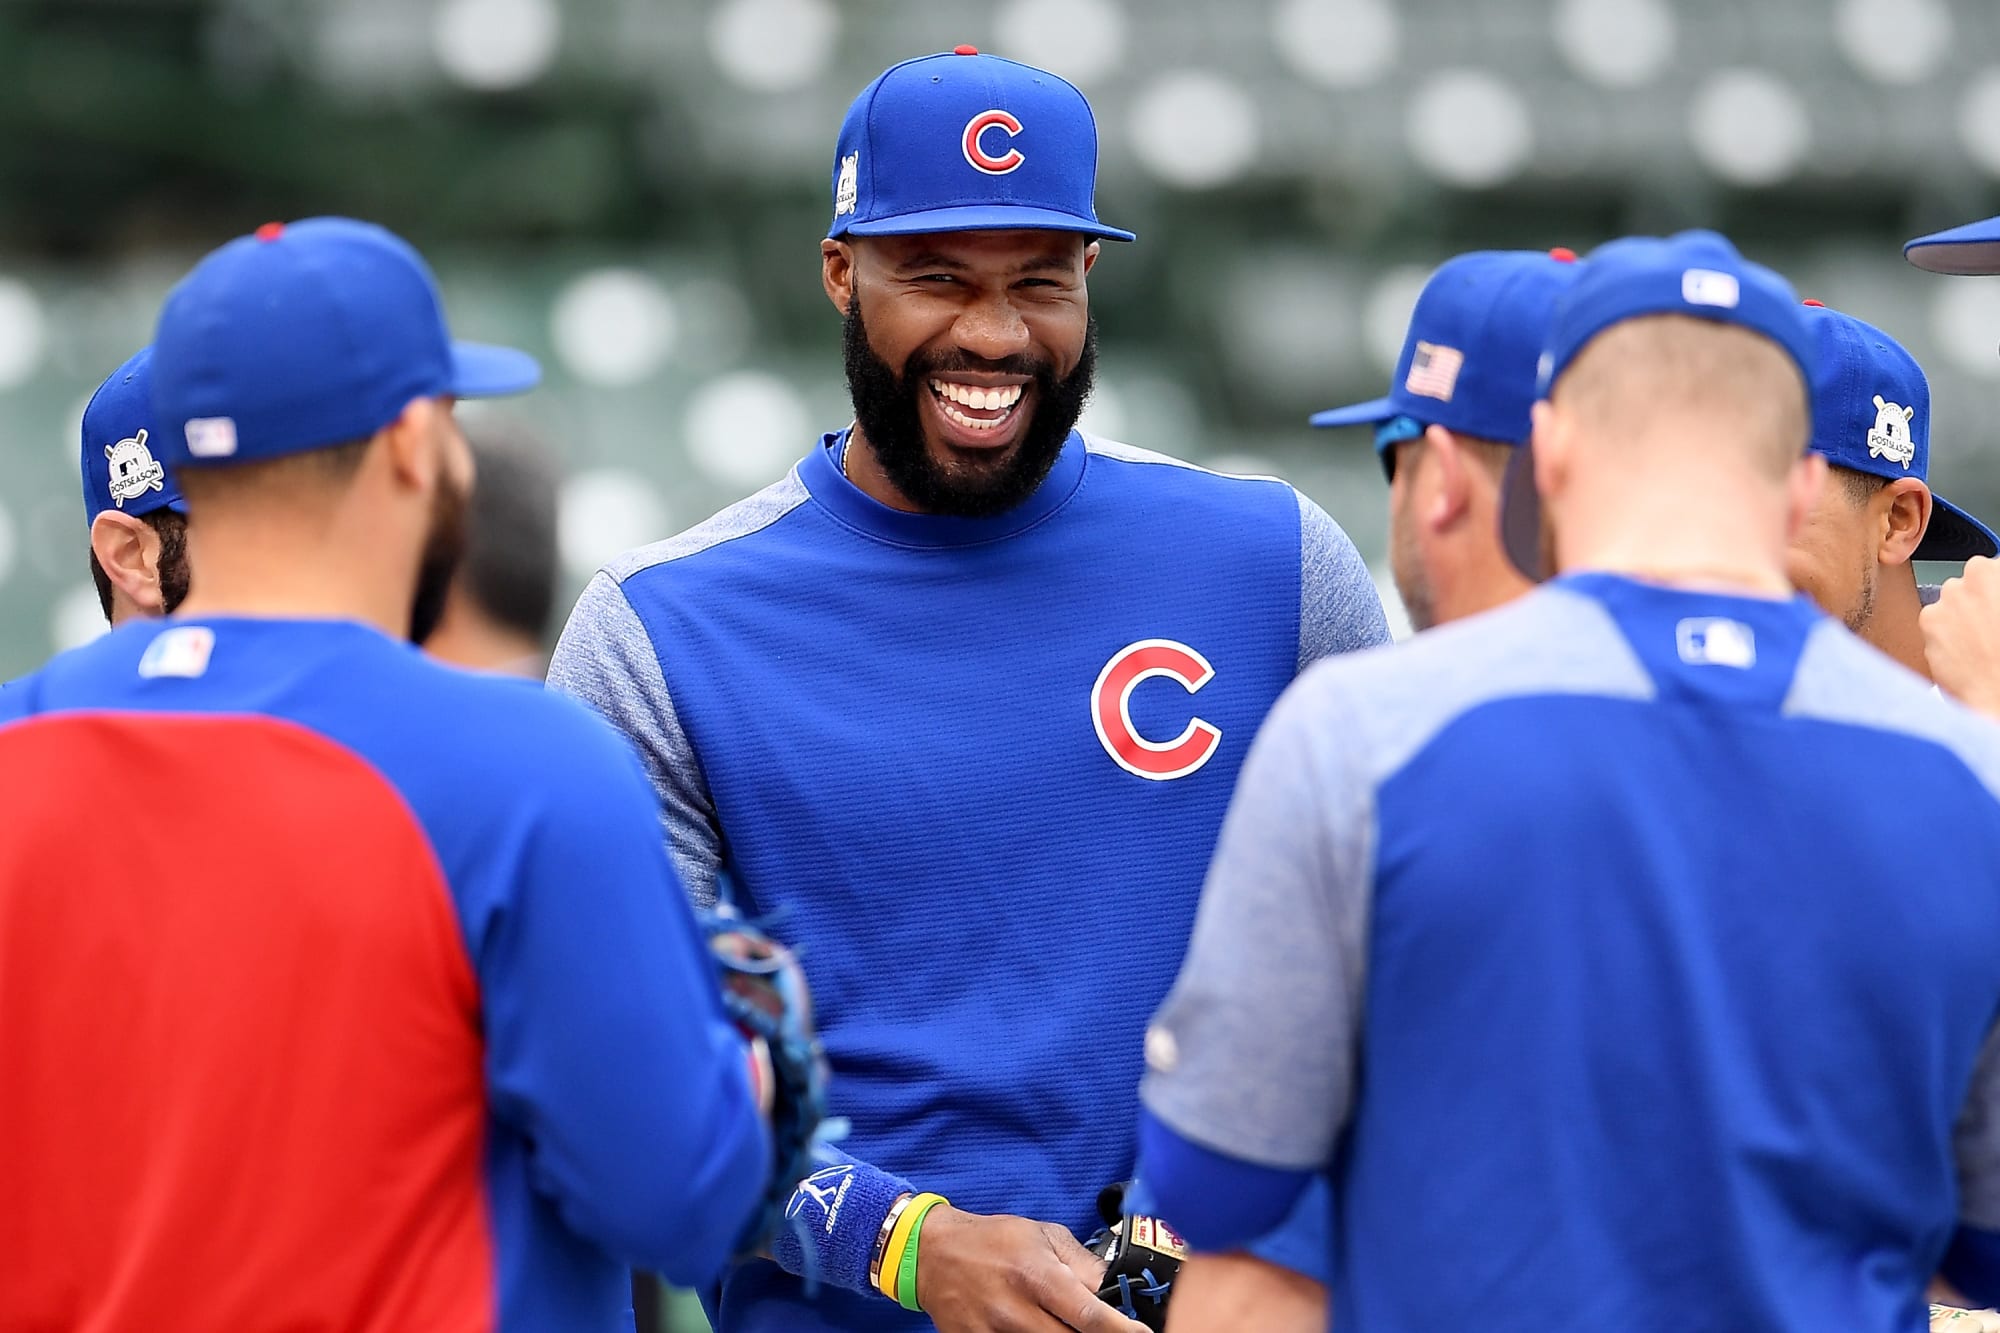 Chicago Cubs There's very little drama in this year's roster